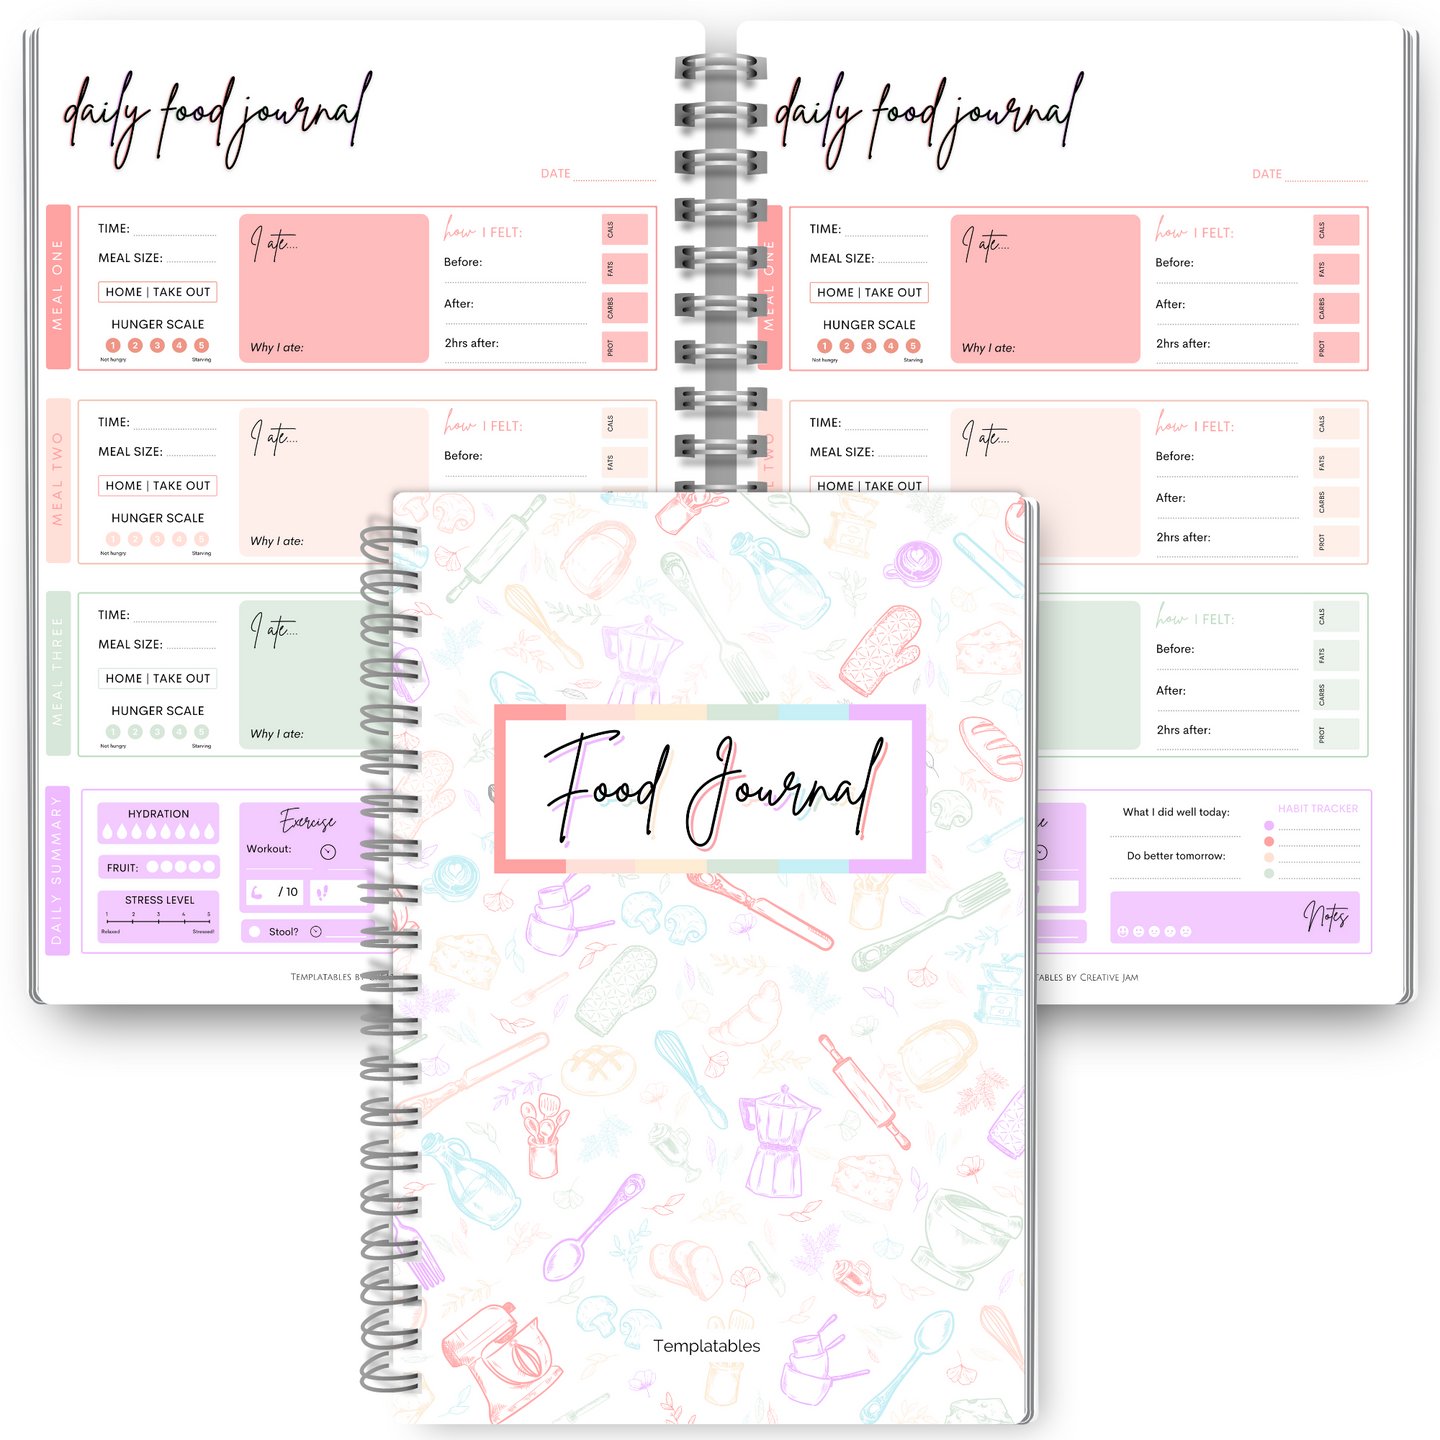 Food Journal: Daily Food Journal, 90 Day Meal Tracker & Planner, Fitness Diet Wellness Planner, Habit Tracker, Weight Loss Tracker, Nutrition Log, Daily Food Diary | A5 Pastel Rainbow